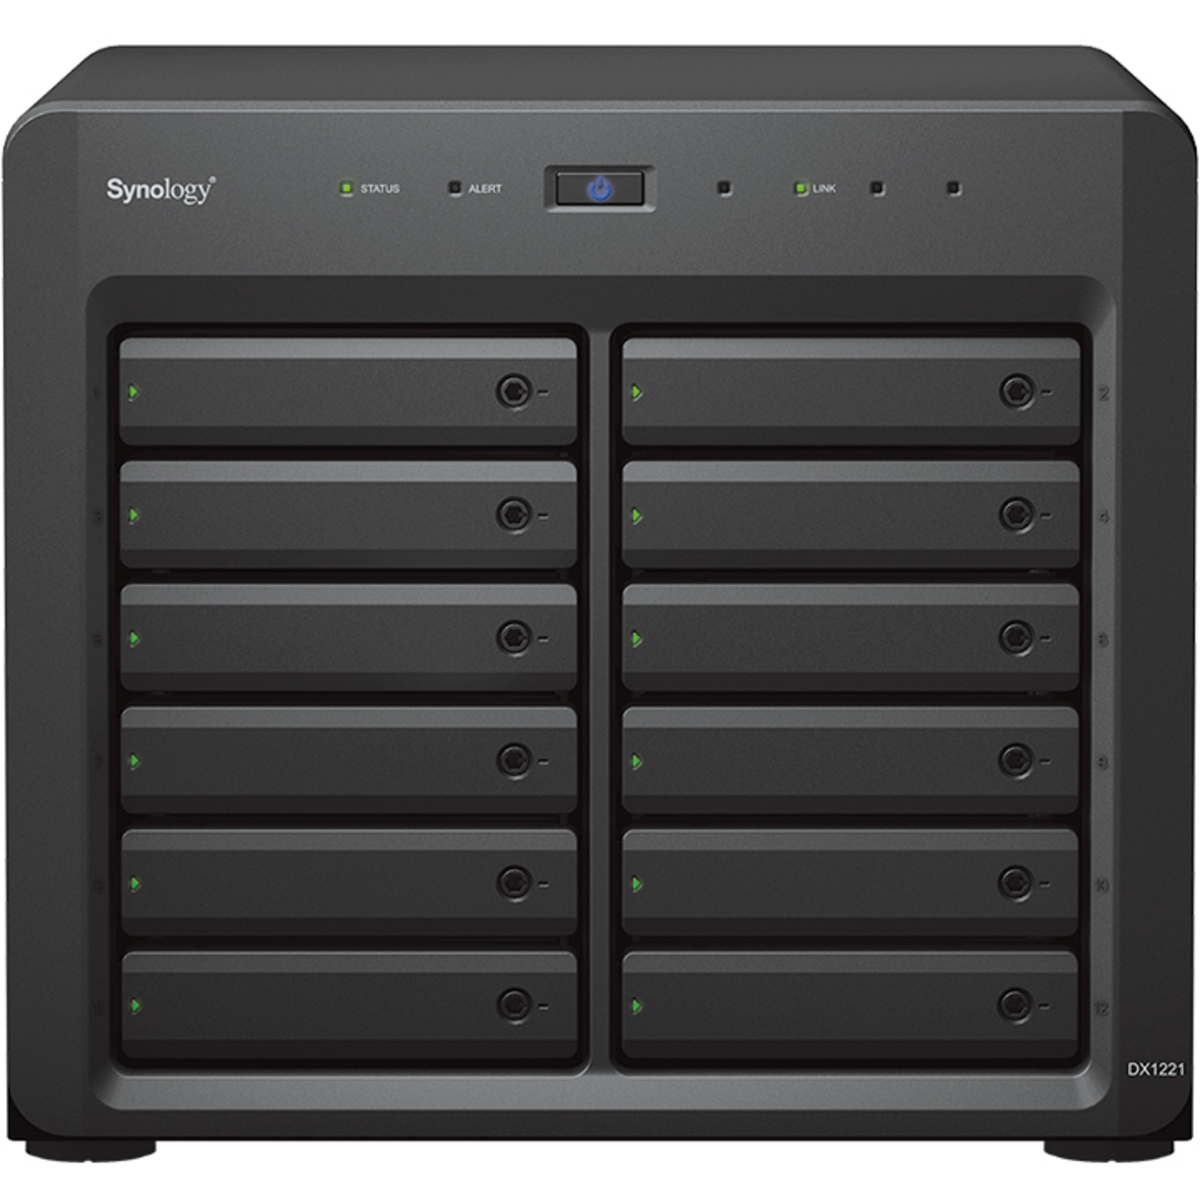 Synology DX1222 External Expansion Drive 40tb 12-Bay Desktop Multimedia / Power User / Business Expansion Enclosure 10x4tb Crucial MX500 CT4000MX500SSD1 2.5 560/510MB/s SATA 6Gb/s SSD CONSUMER Class Drives Installed - Burn-In Tested DX1222 External Expansion Drive